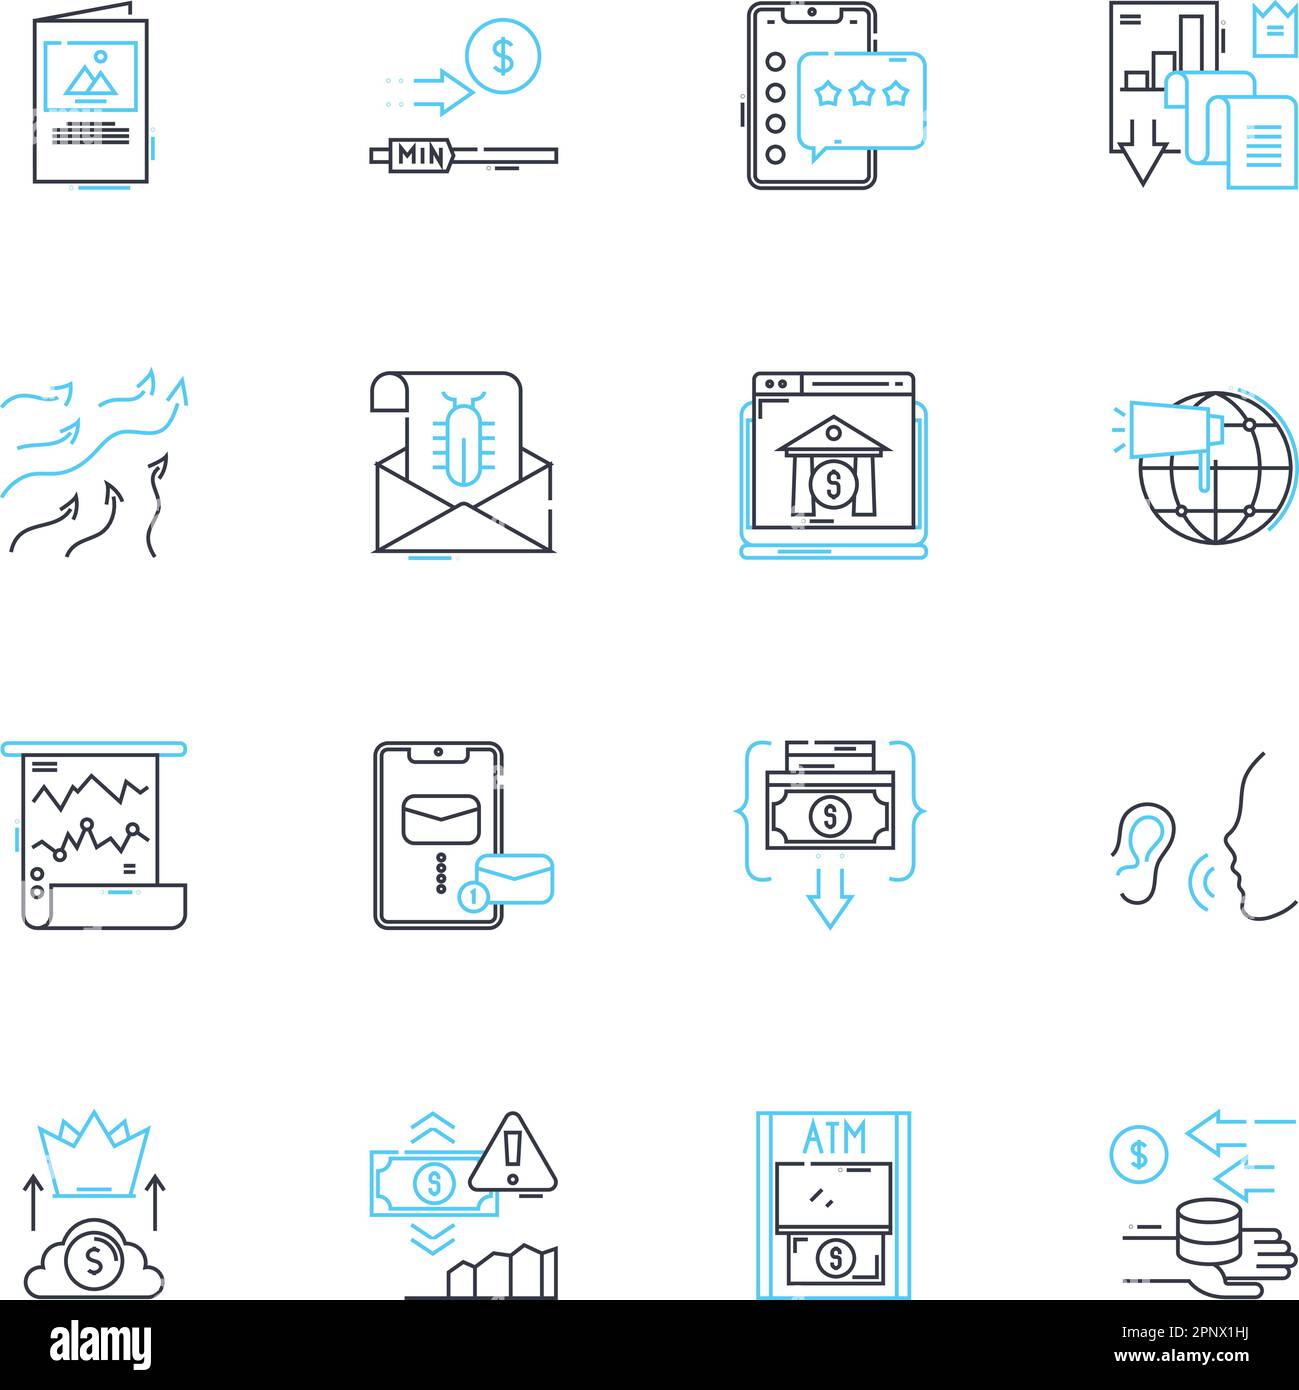 Affordable - Inexpensive linear icons set. Cost-effective, Economical, Low-cost, Reasonable, Budget-friendly, Thrifty, Frugal line vector and concept Stock Vector